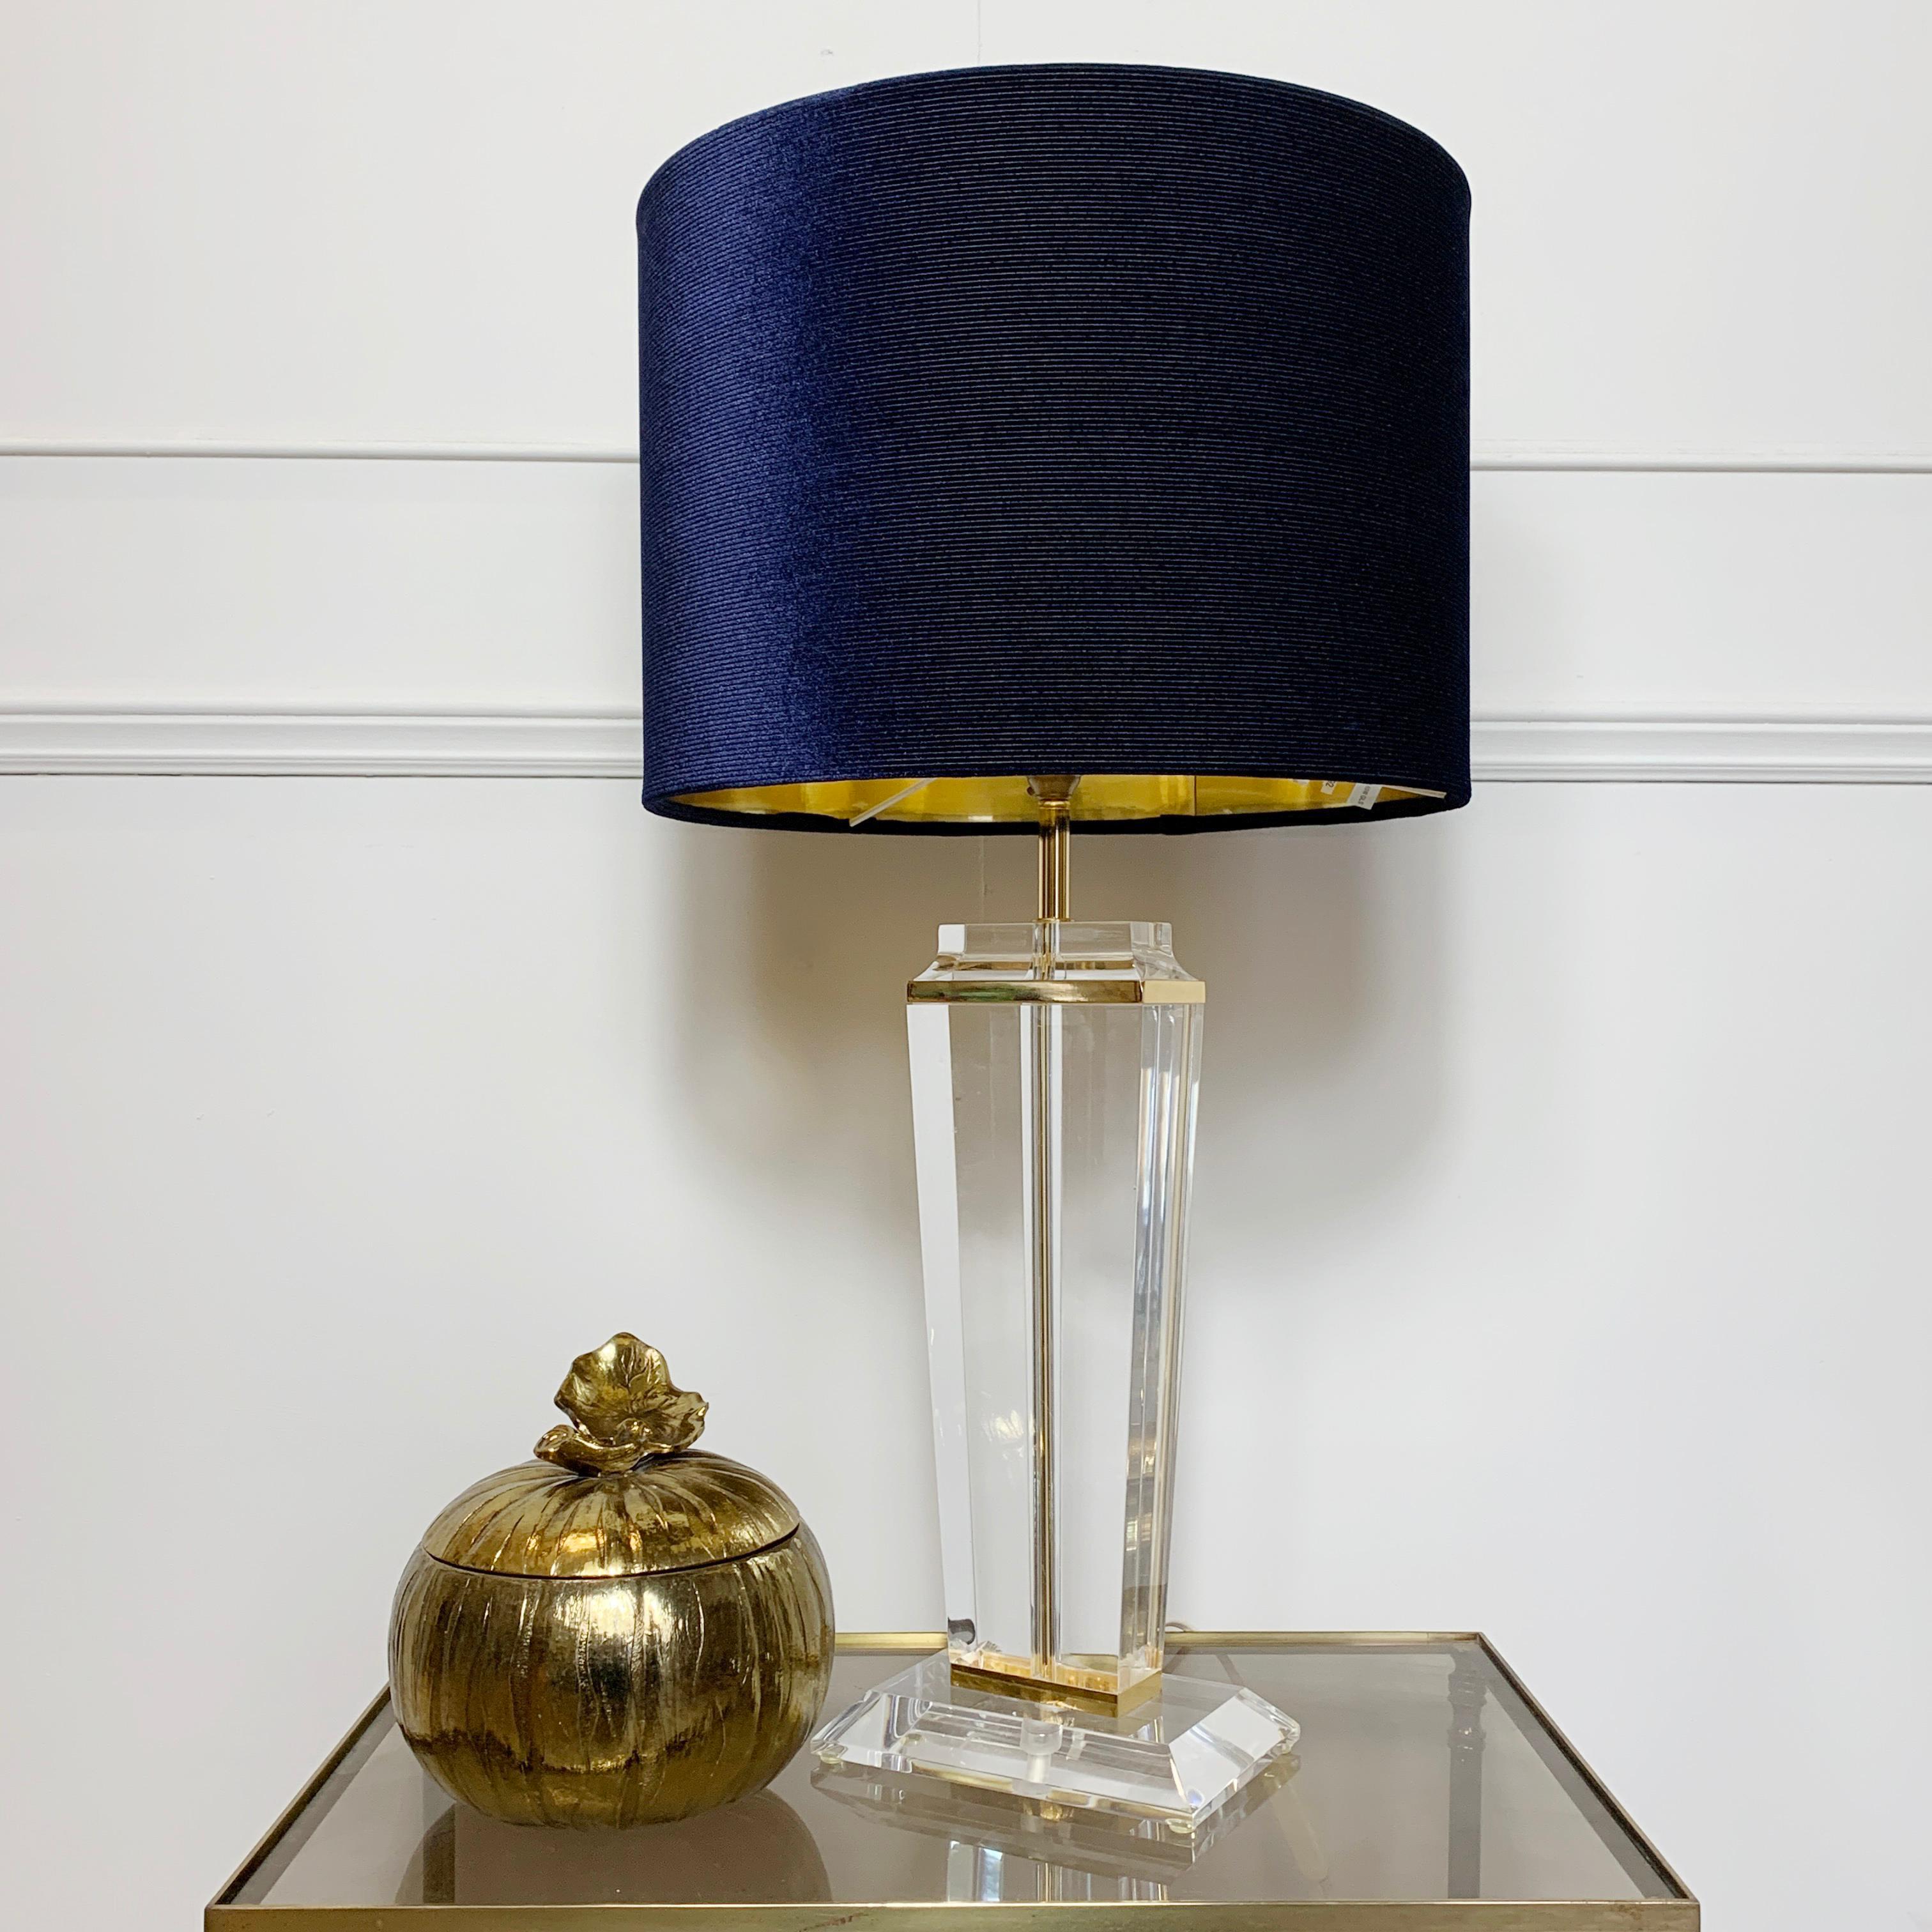 French midcentury Lucite table lamp
circa 1960s-1970s
Lucite lamp base with gilt details 
Measures: 68cm height (inc shade) lamp base 47cm height, shade 36 W x 26 H, base 18cm x 12cm

There is a rocker switch on the cable. The light is wired